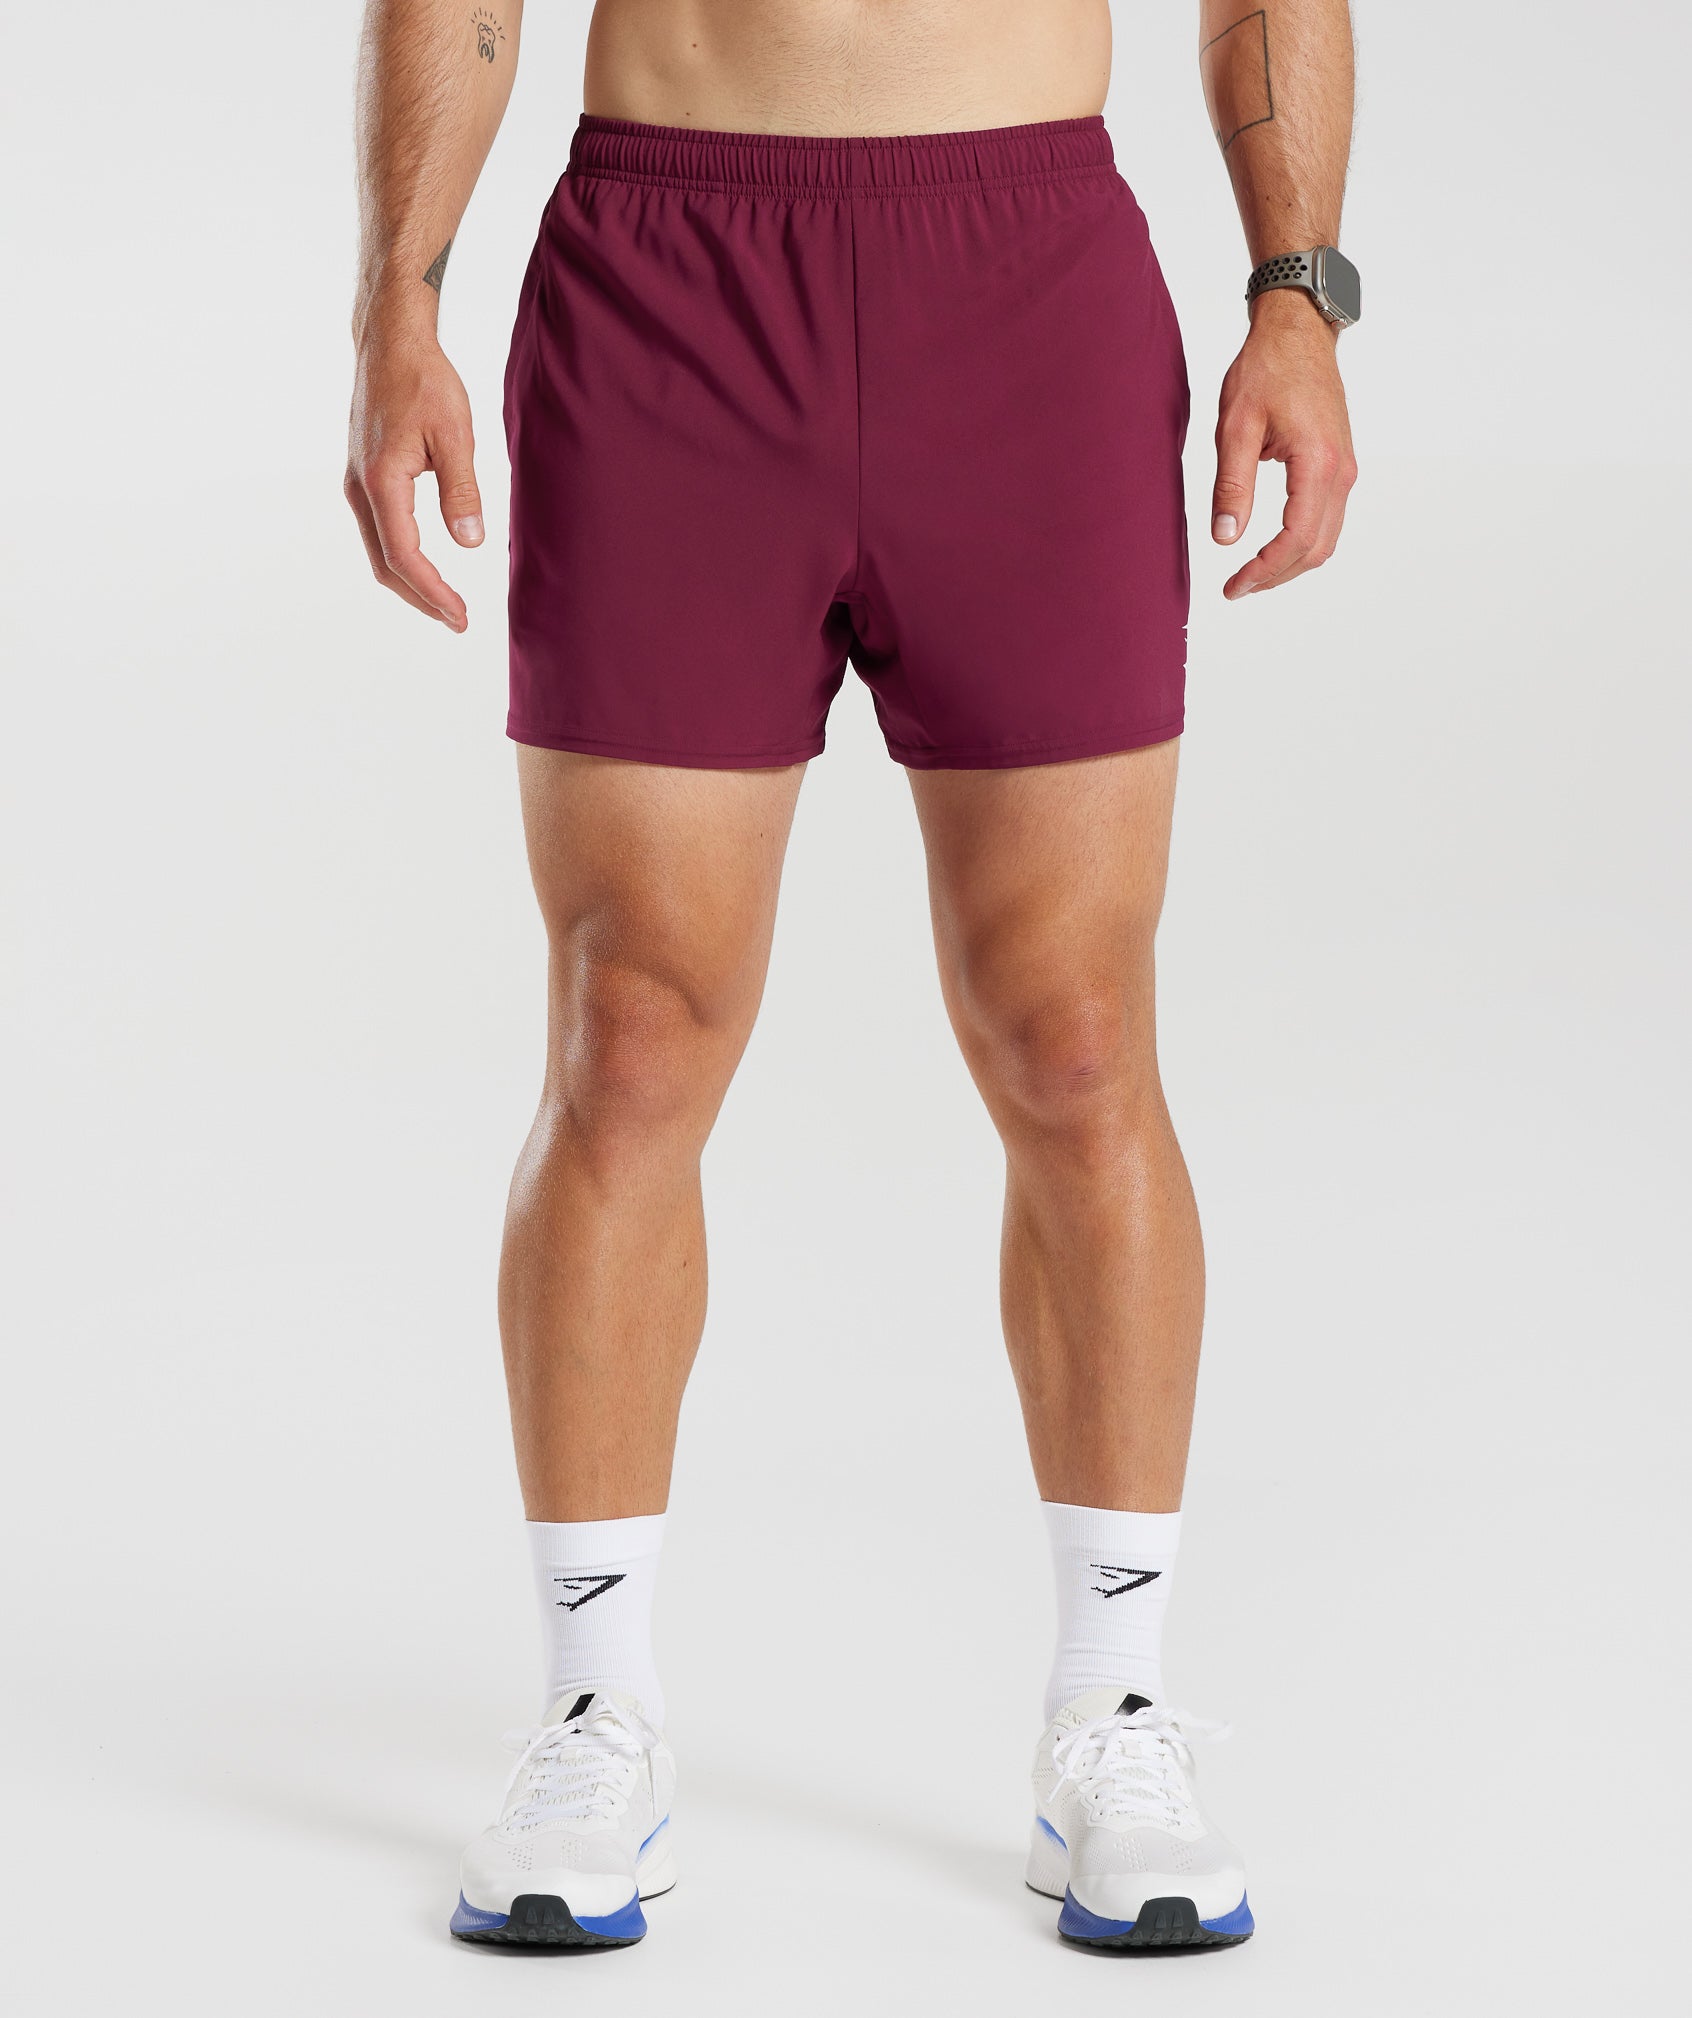 Arrival 5" Shorts in Plum Pink - view 1